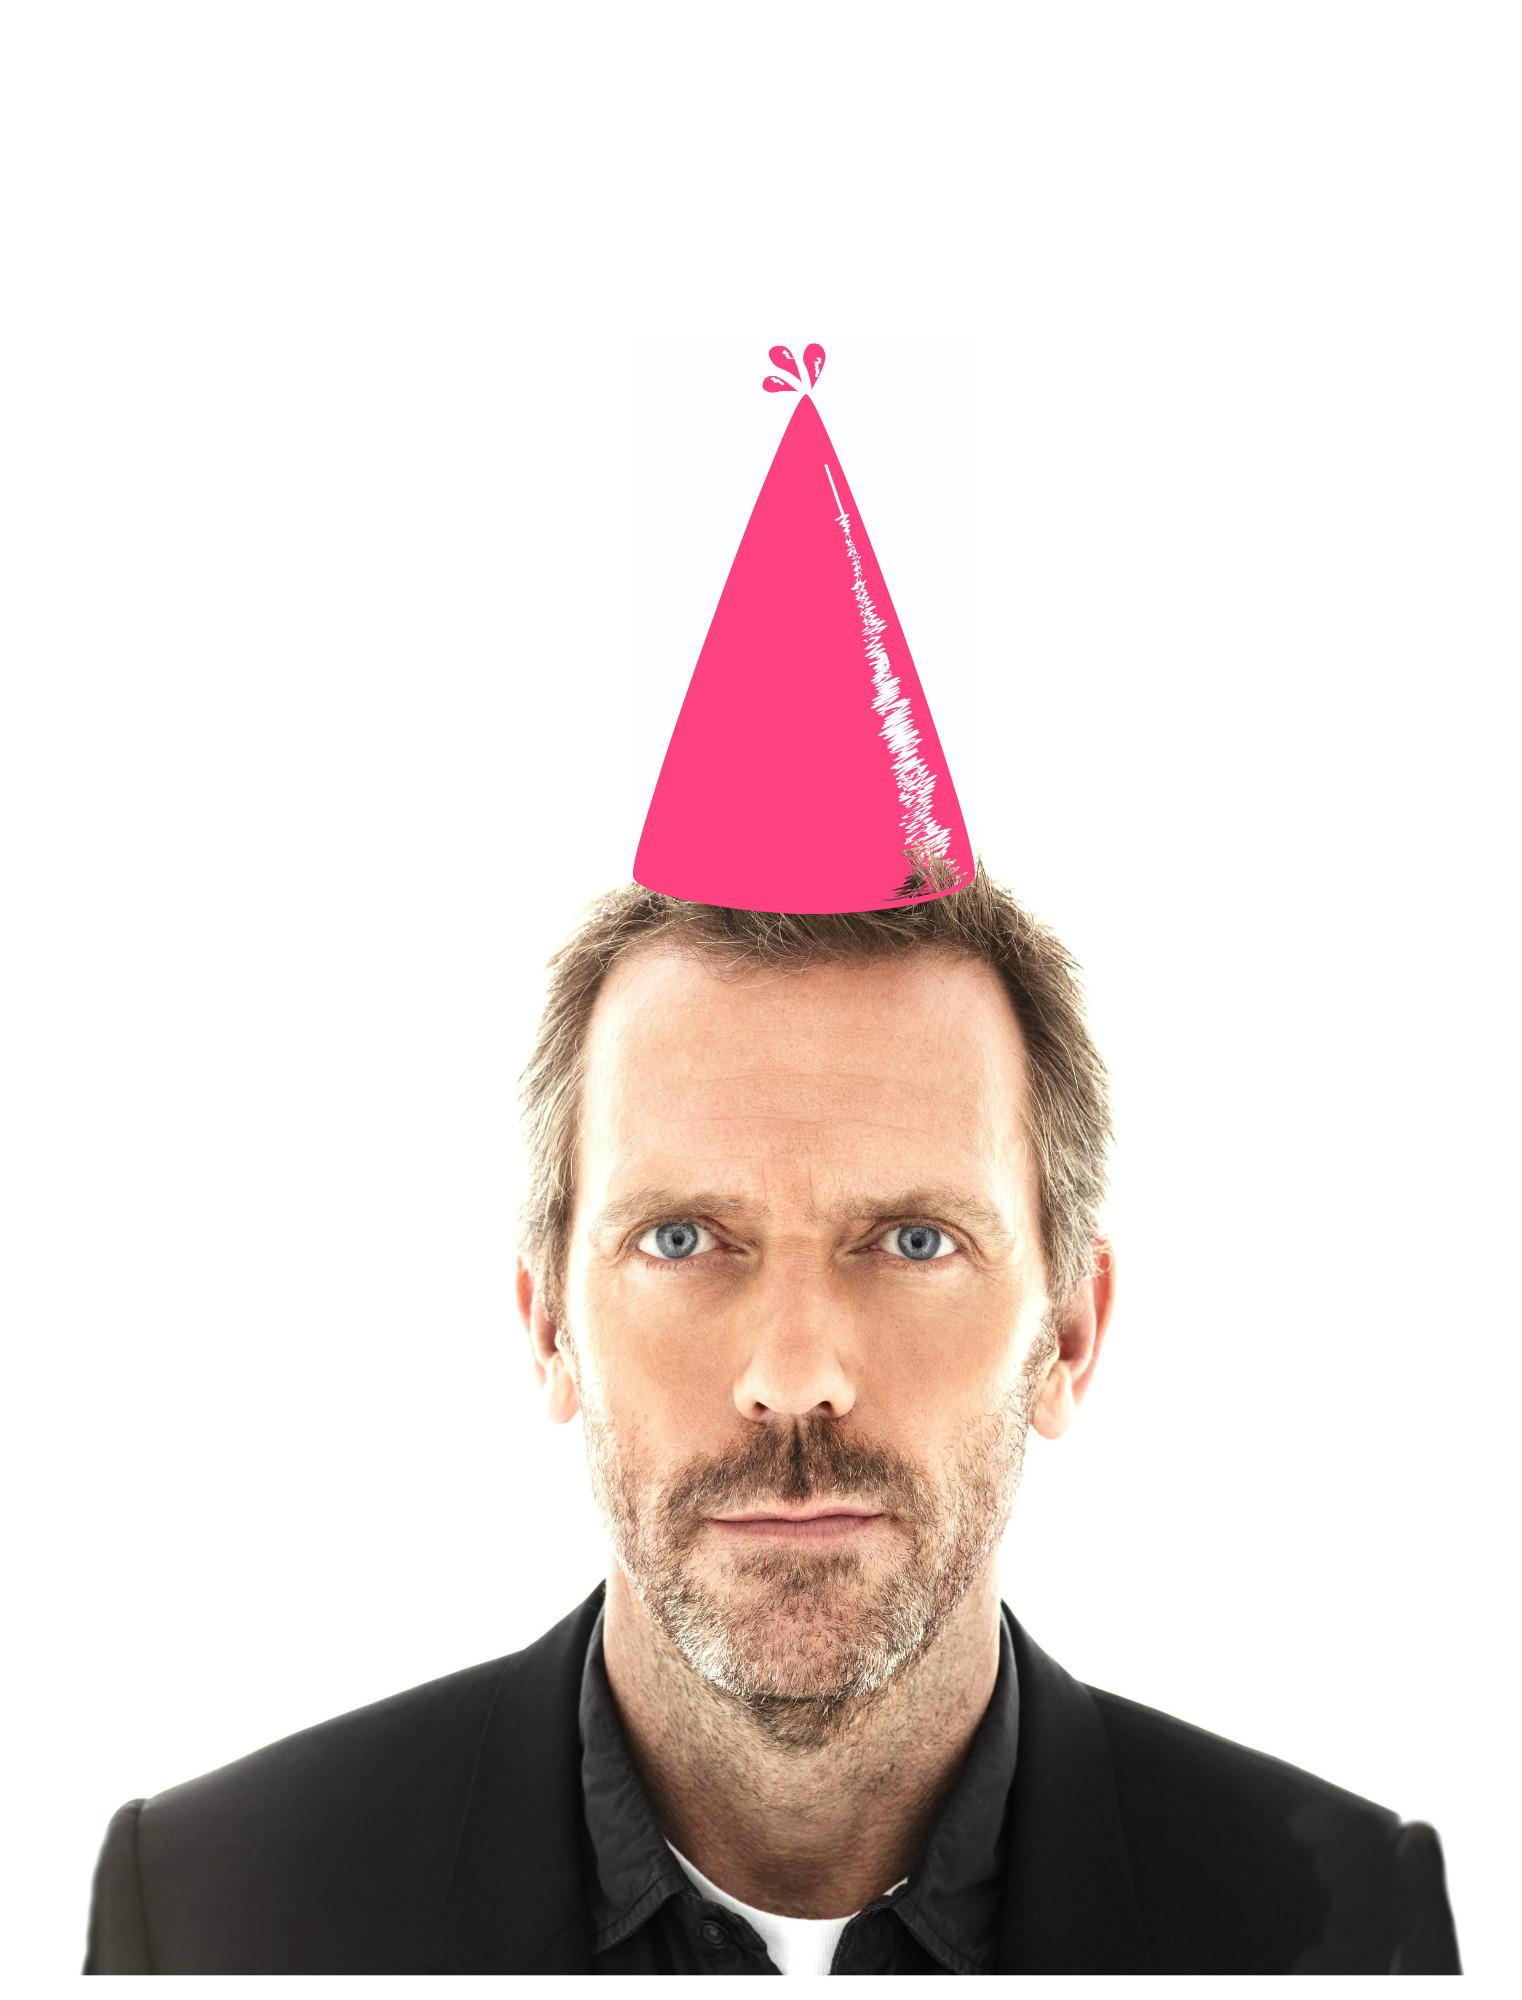 Happy birthday, Hugh Laurie! He\s best known an an actor, but DYK he\s also a novelist?  